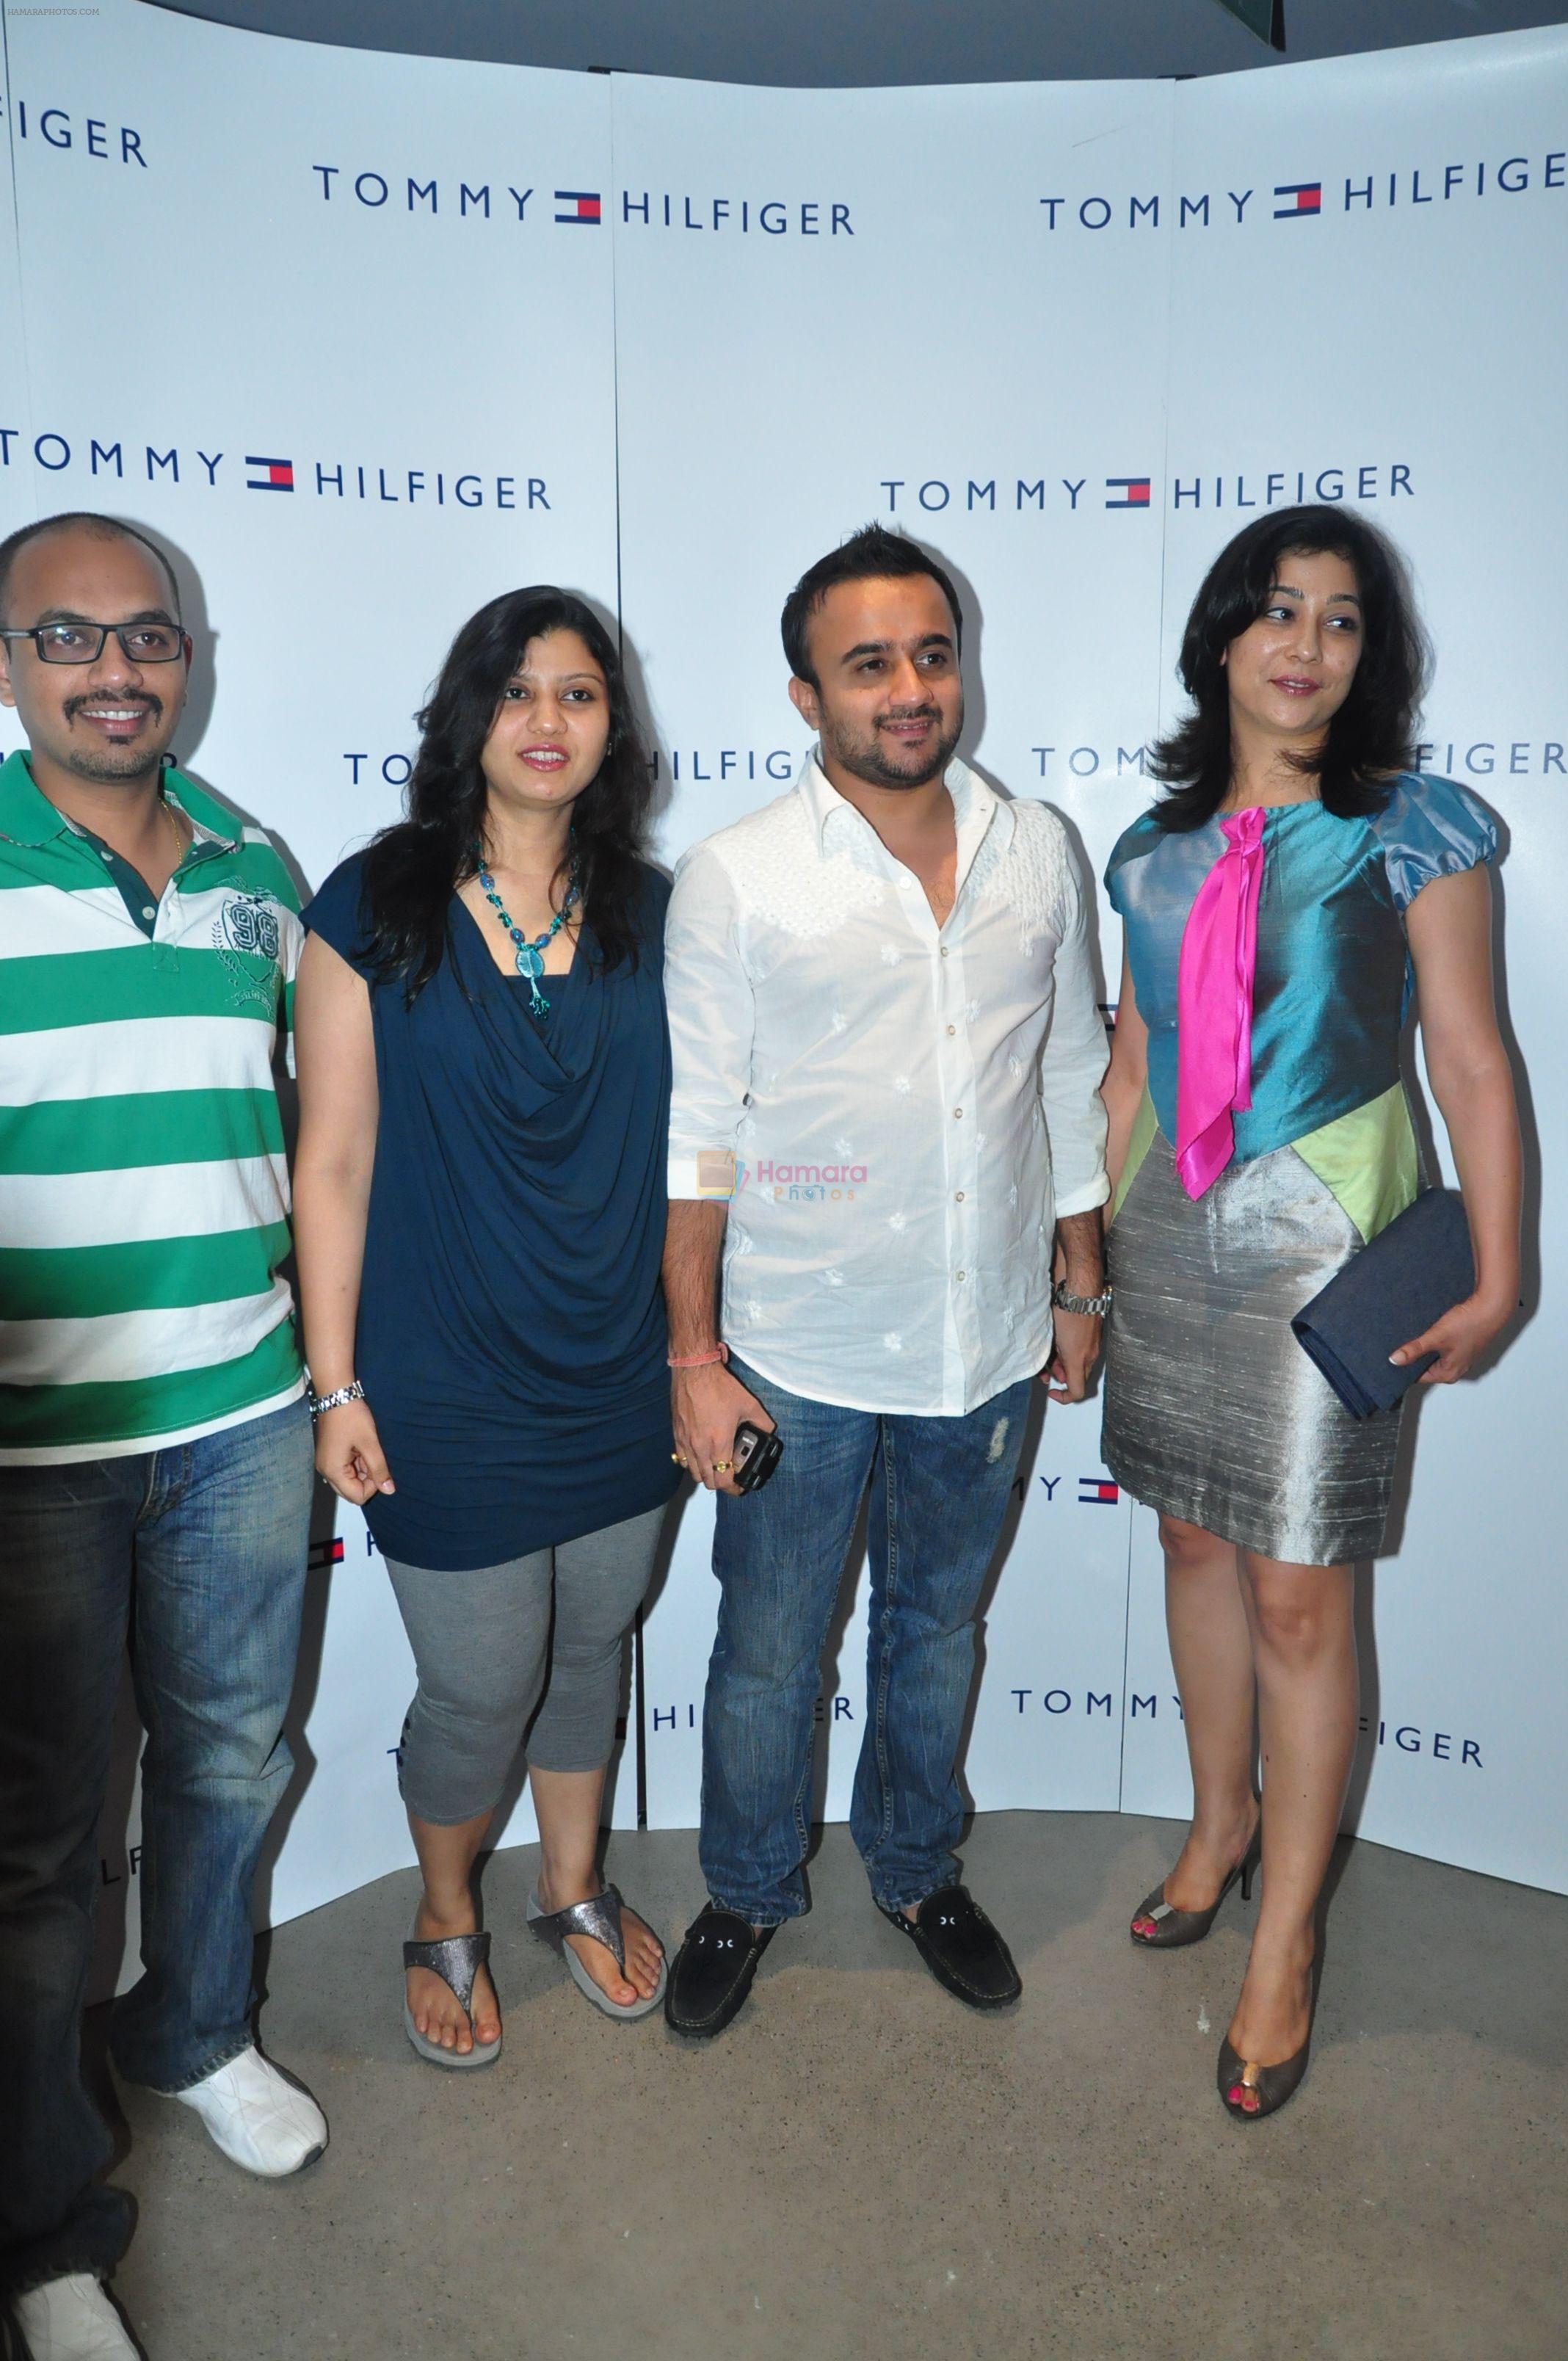 Tommy Hilfiger Showroom Relaunch Party held at Kismet Pub, Park Hotel, Hyderabad on 17th September 2011